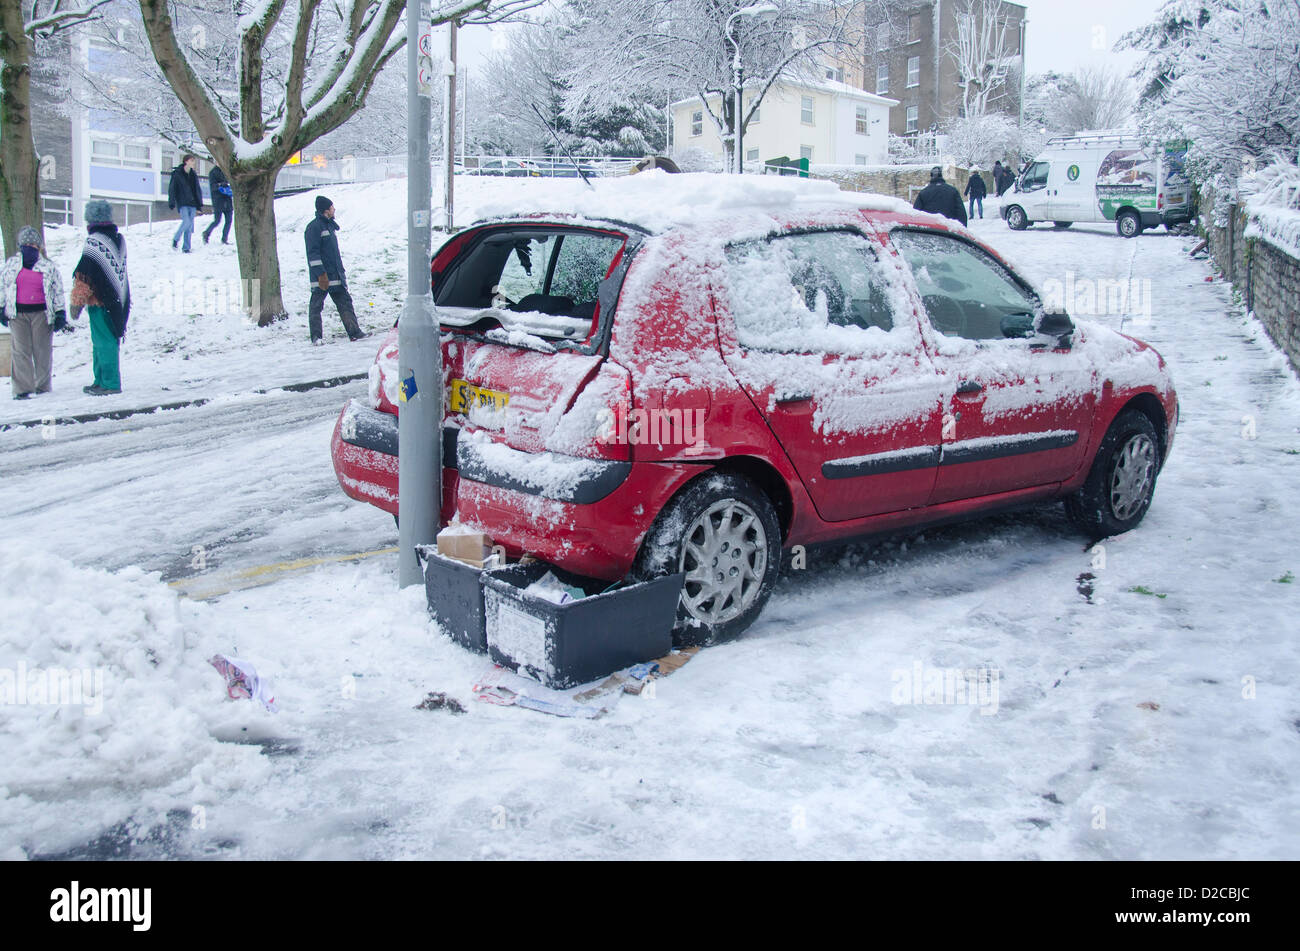 Nine Tree Hill, Bristol, UK, Friday 18th January 2013. Car crashed into lamp post and van crashed into wall on Nine Tree Hill. Alamy Live News Stock Photo